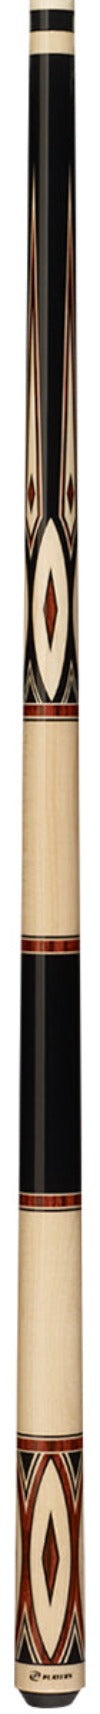 Players G-3394 Pool Cue -Players